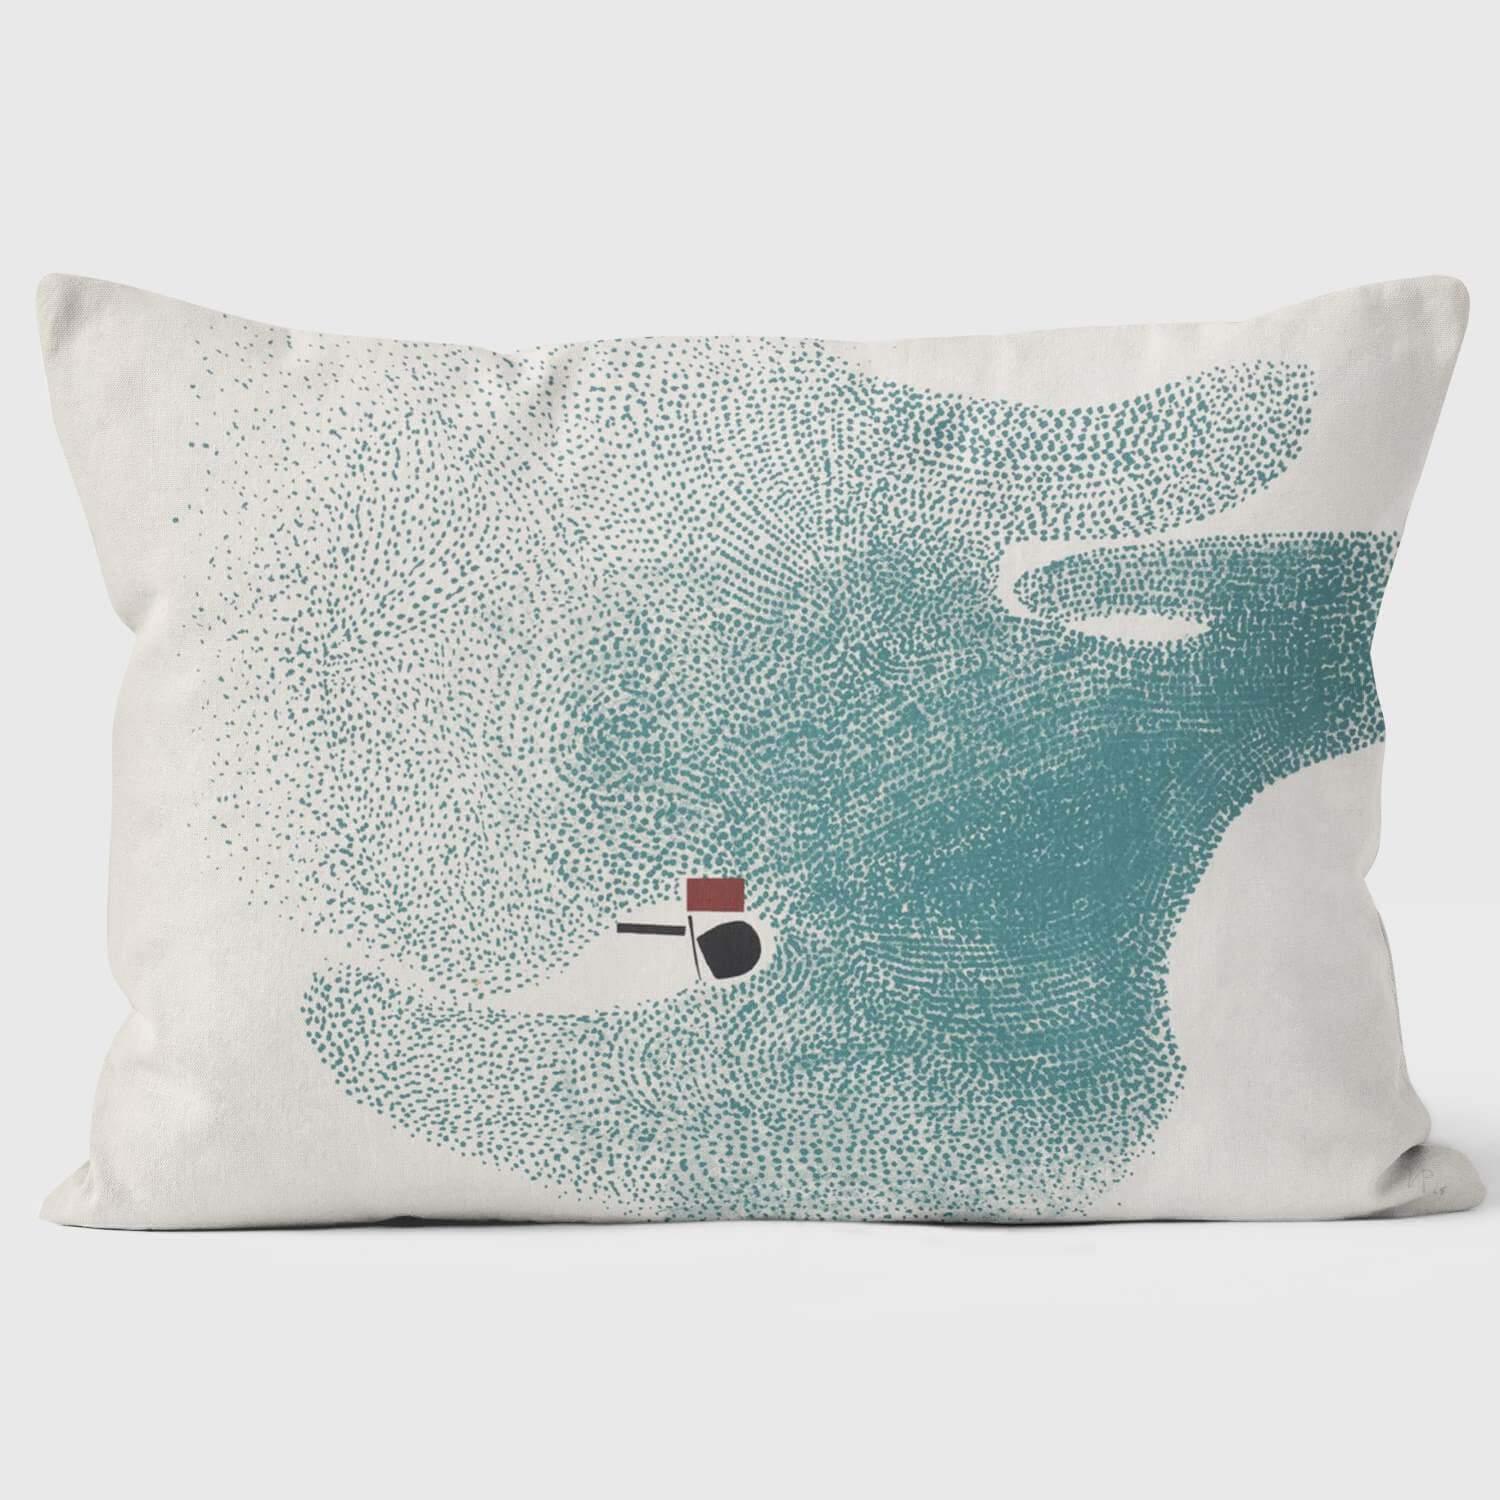 Points of Contact 2 -TATE - Victor Pasmore Cushion - Handmade Cushions UK - WeLoveCushions